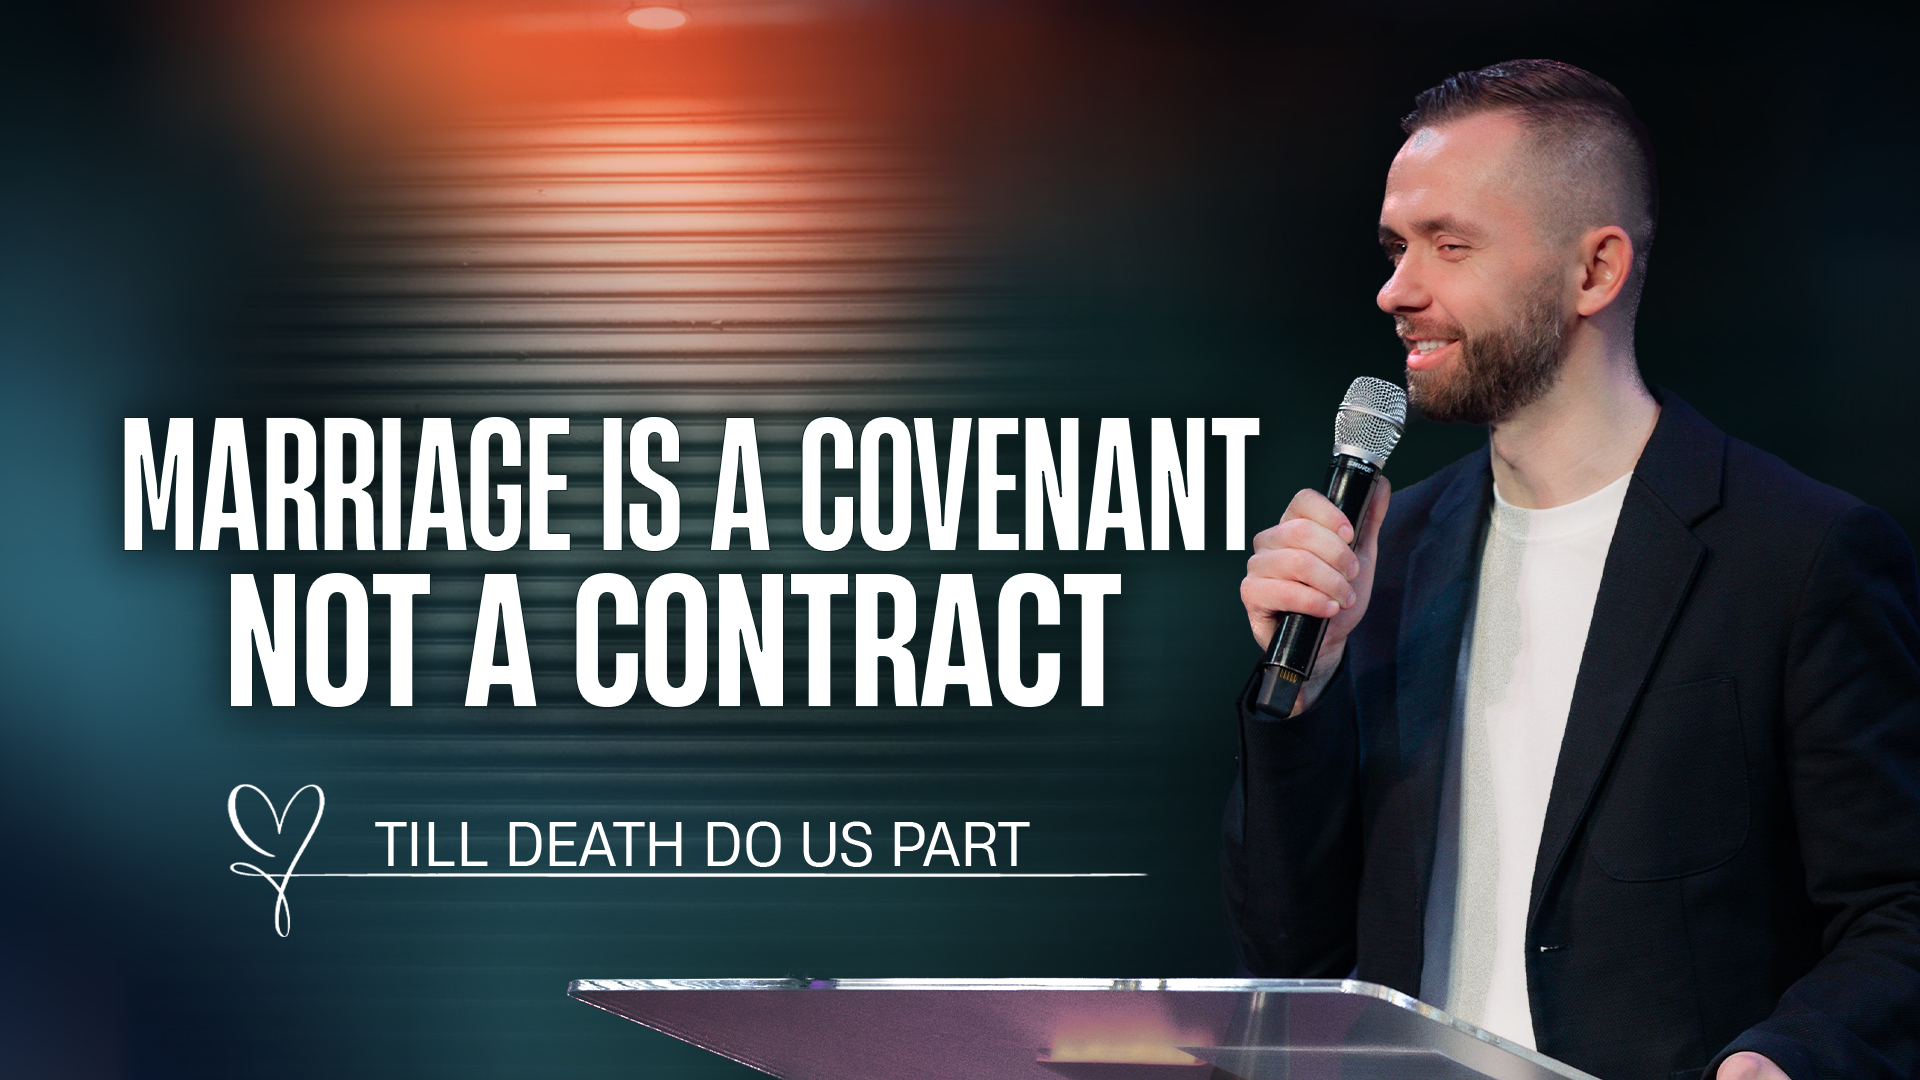 Featured Image for “Marriage is a Covenant, Not a Contract”